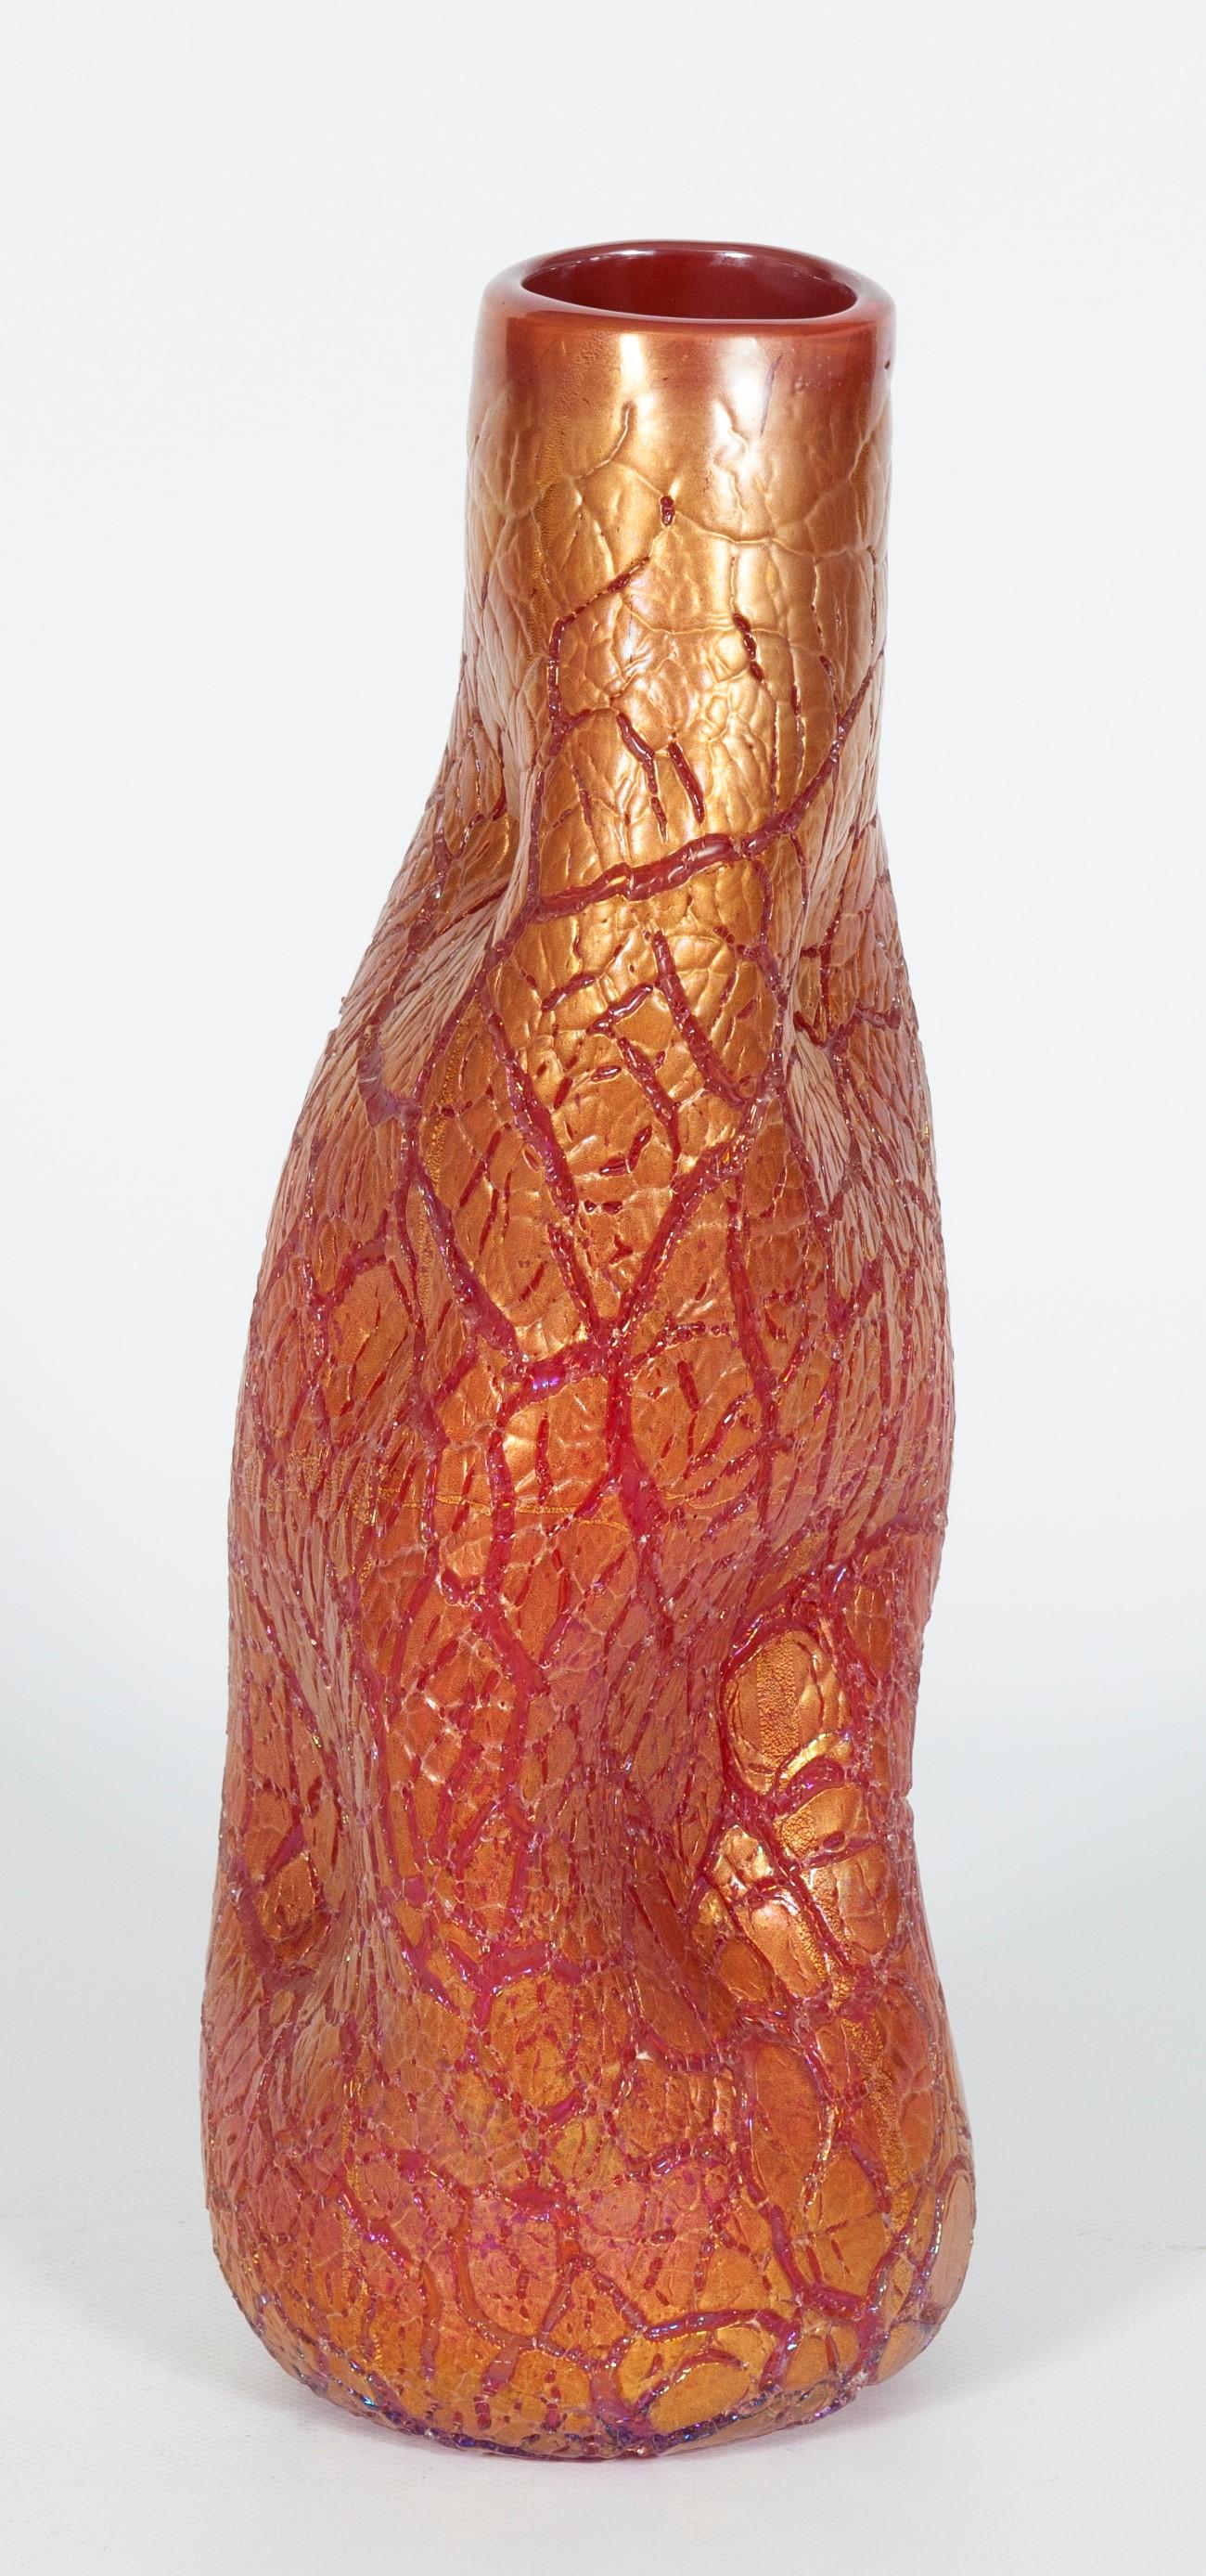 Iced Vase in coral color with a gold nuances in blown Murano Glass 1990s Italy
This is a timeless design vase in Murano glass, this beauty is entirely handcrafted in blown Murano glass, and its manufacture is dated 1990s.
The beautiful iced effect